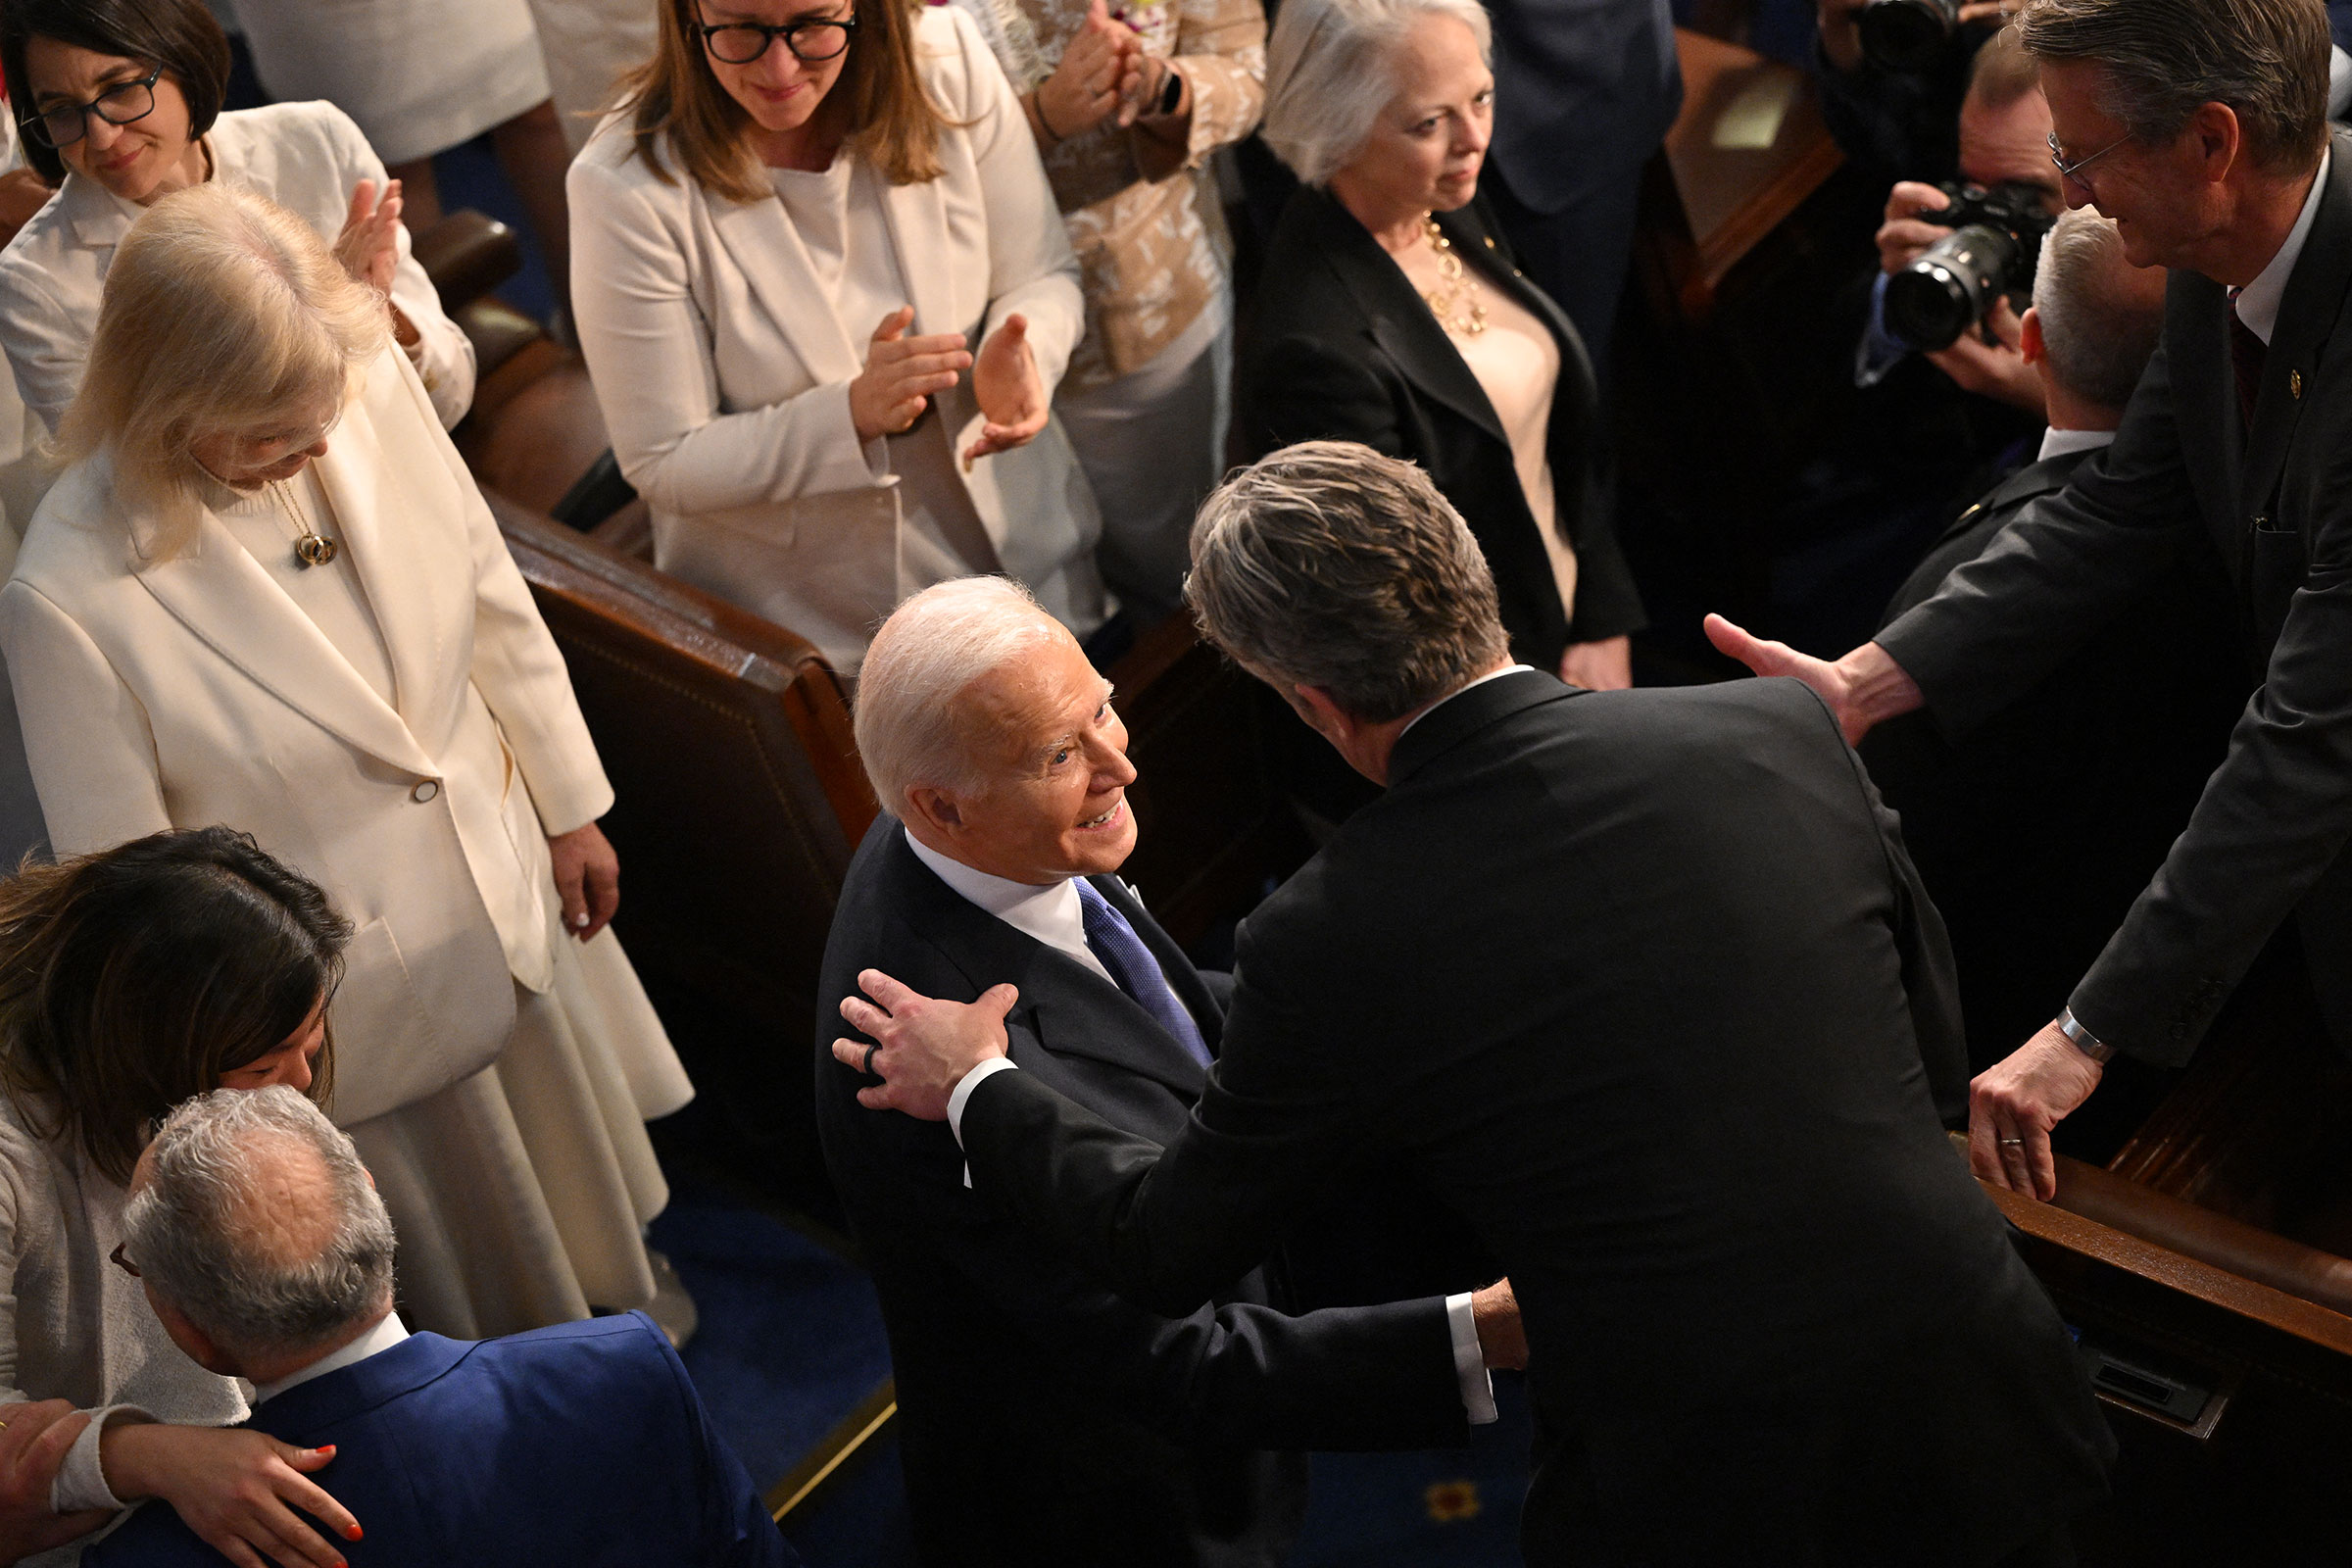 President Joe Biden arrives to deliver the State of the Union address in the House Chamber of the US Capitol in Washington, DC, on March 7.